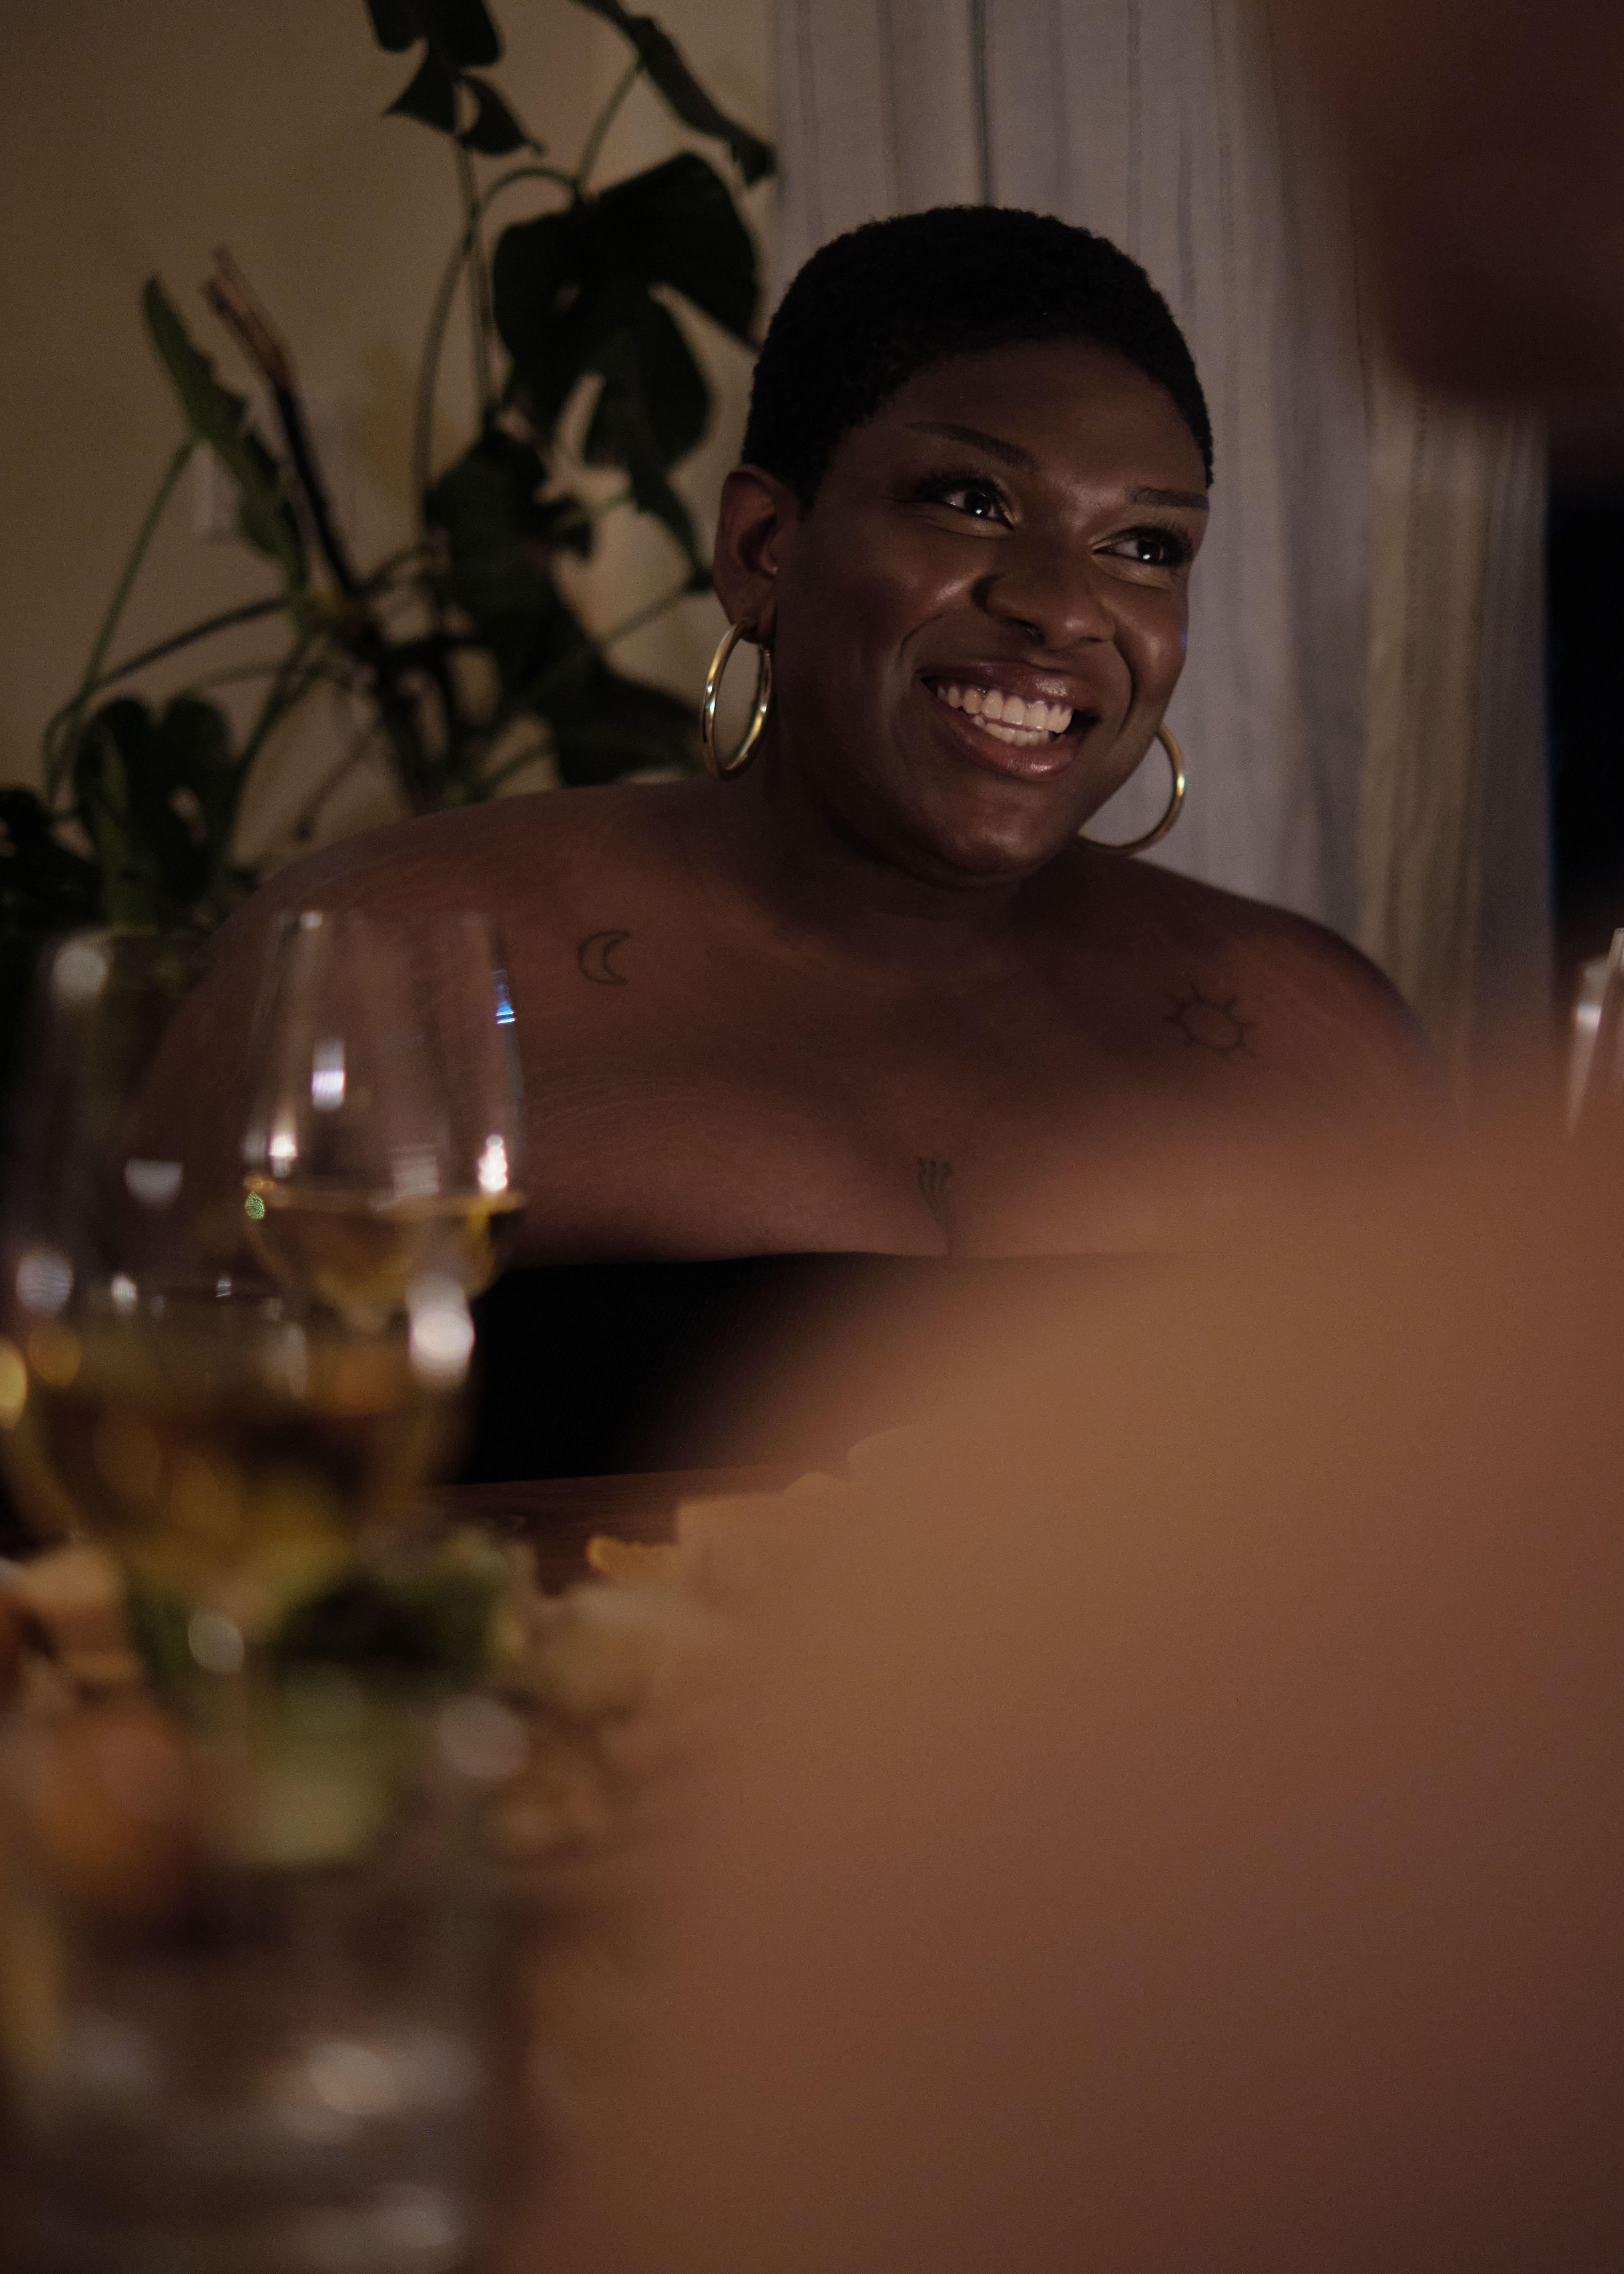 A non-binary trans woman smiling at a dinner party